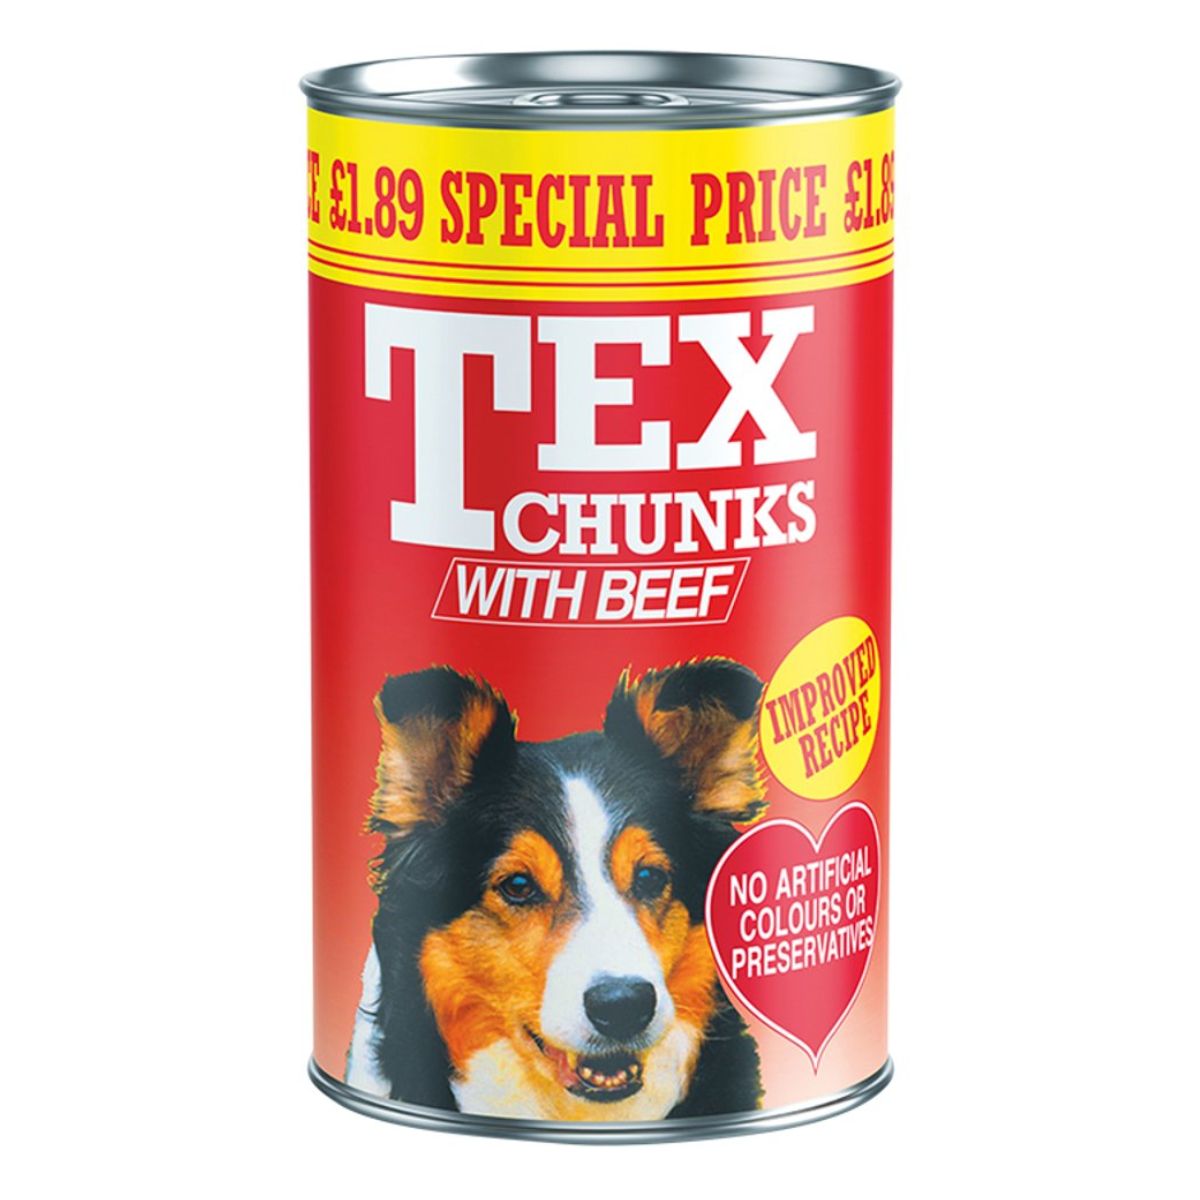 A can of Tex Chunks - with Beef - 1.2kg on a white background.